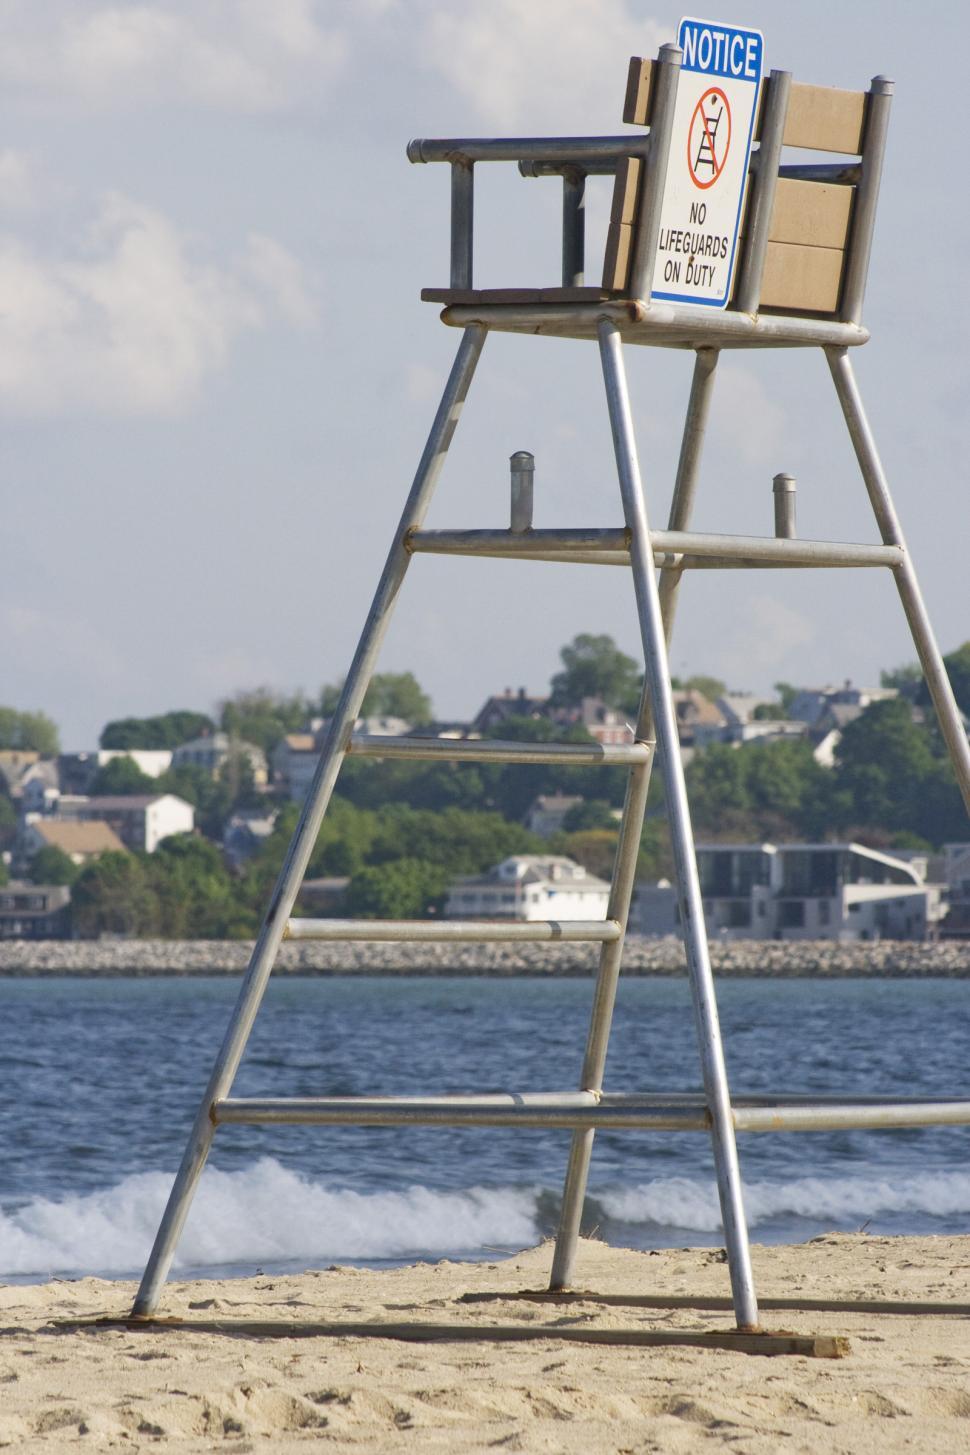 Free Image of Lifeguard Chair on Lifeguard Stand 